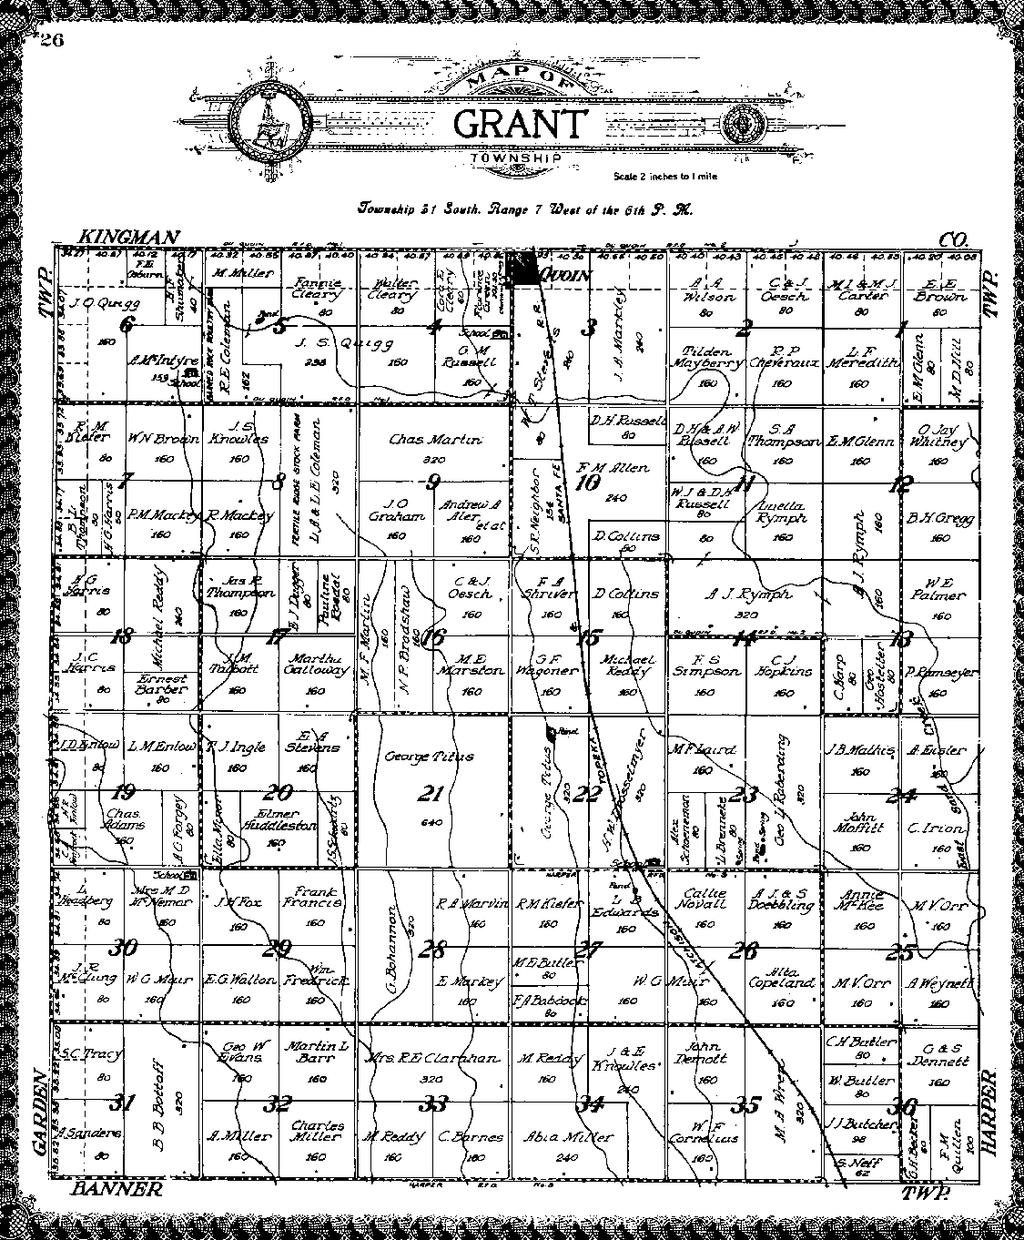 Land-ownership map of Grant Township, northern Harper County, Kansas, in 1919.